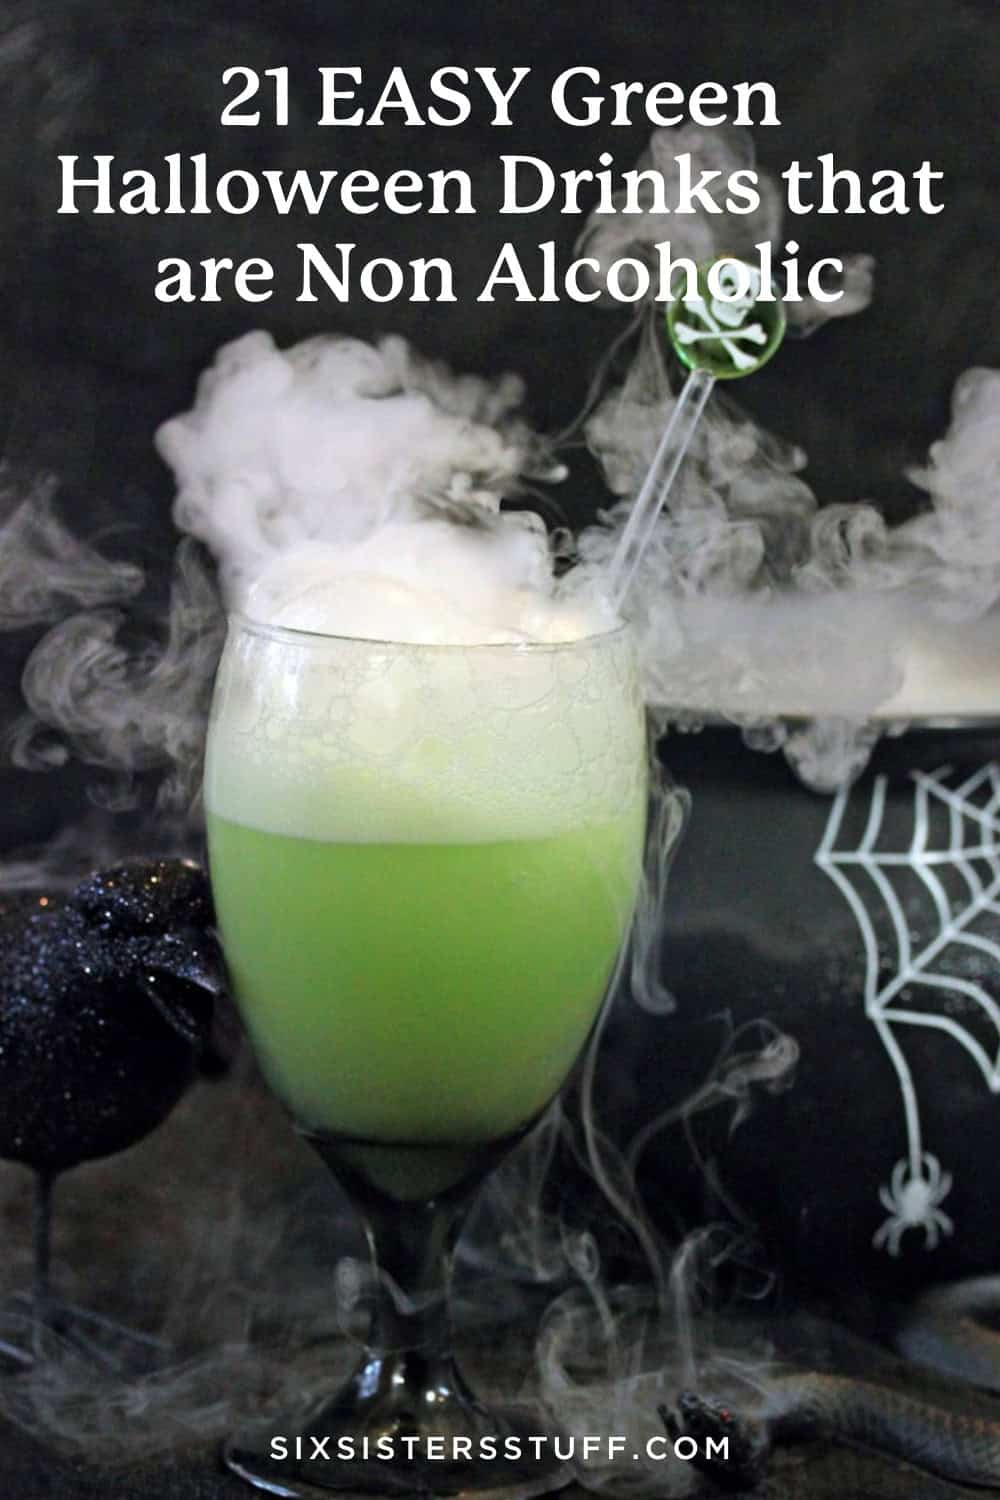 21 EASY Green Halloween Drinks that are Non Alcoholic